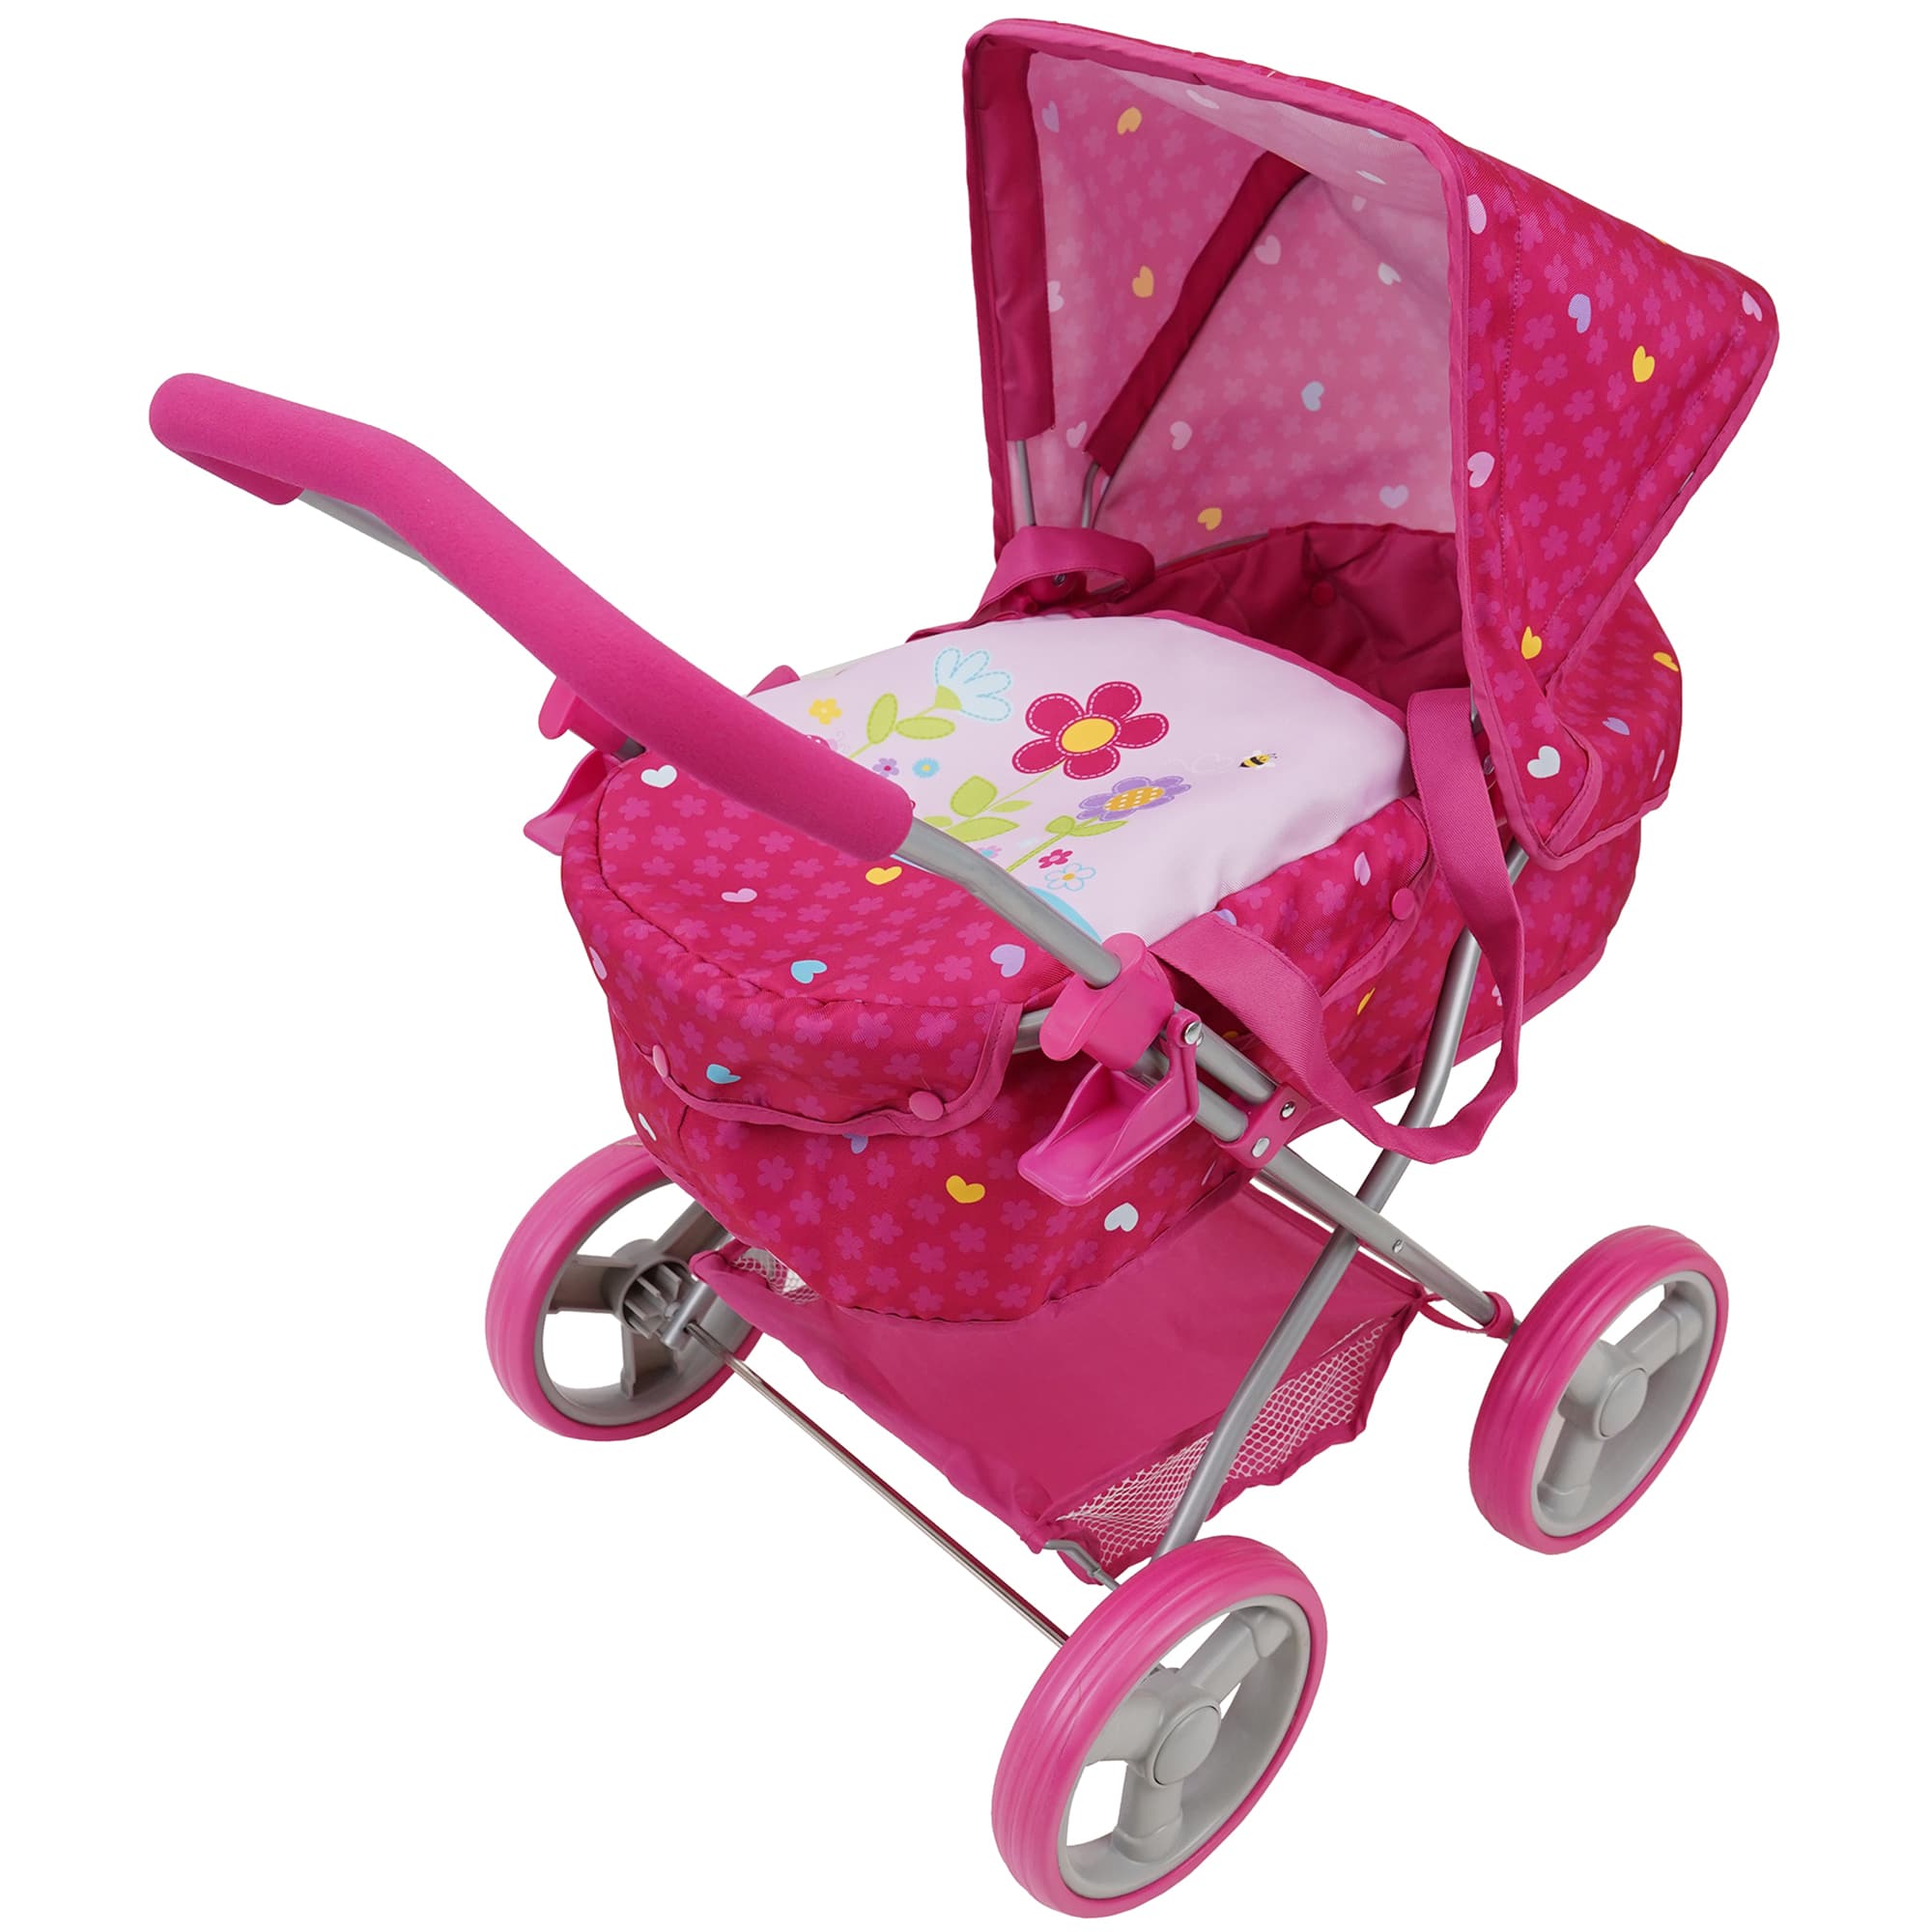 509 Crew Garden Doll Pram with Large Canopy